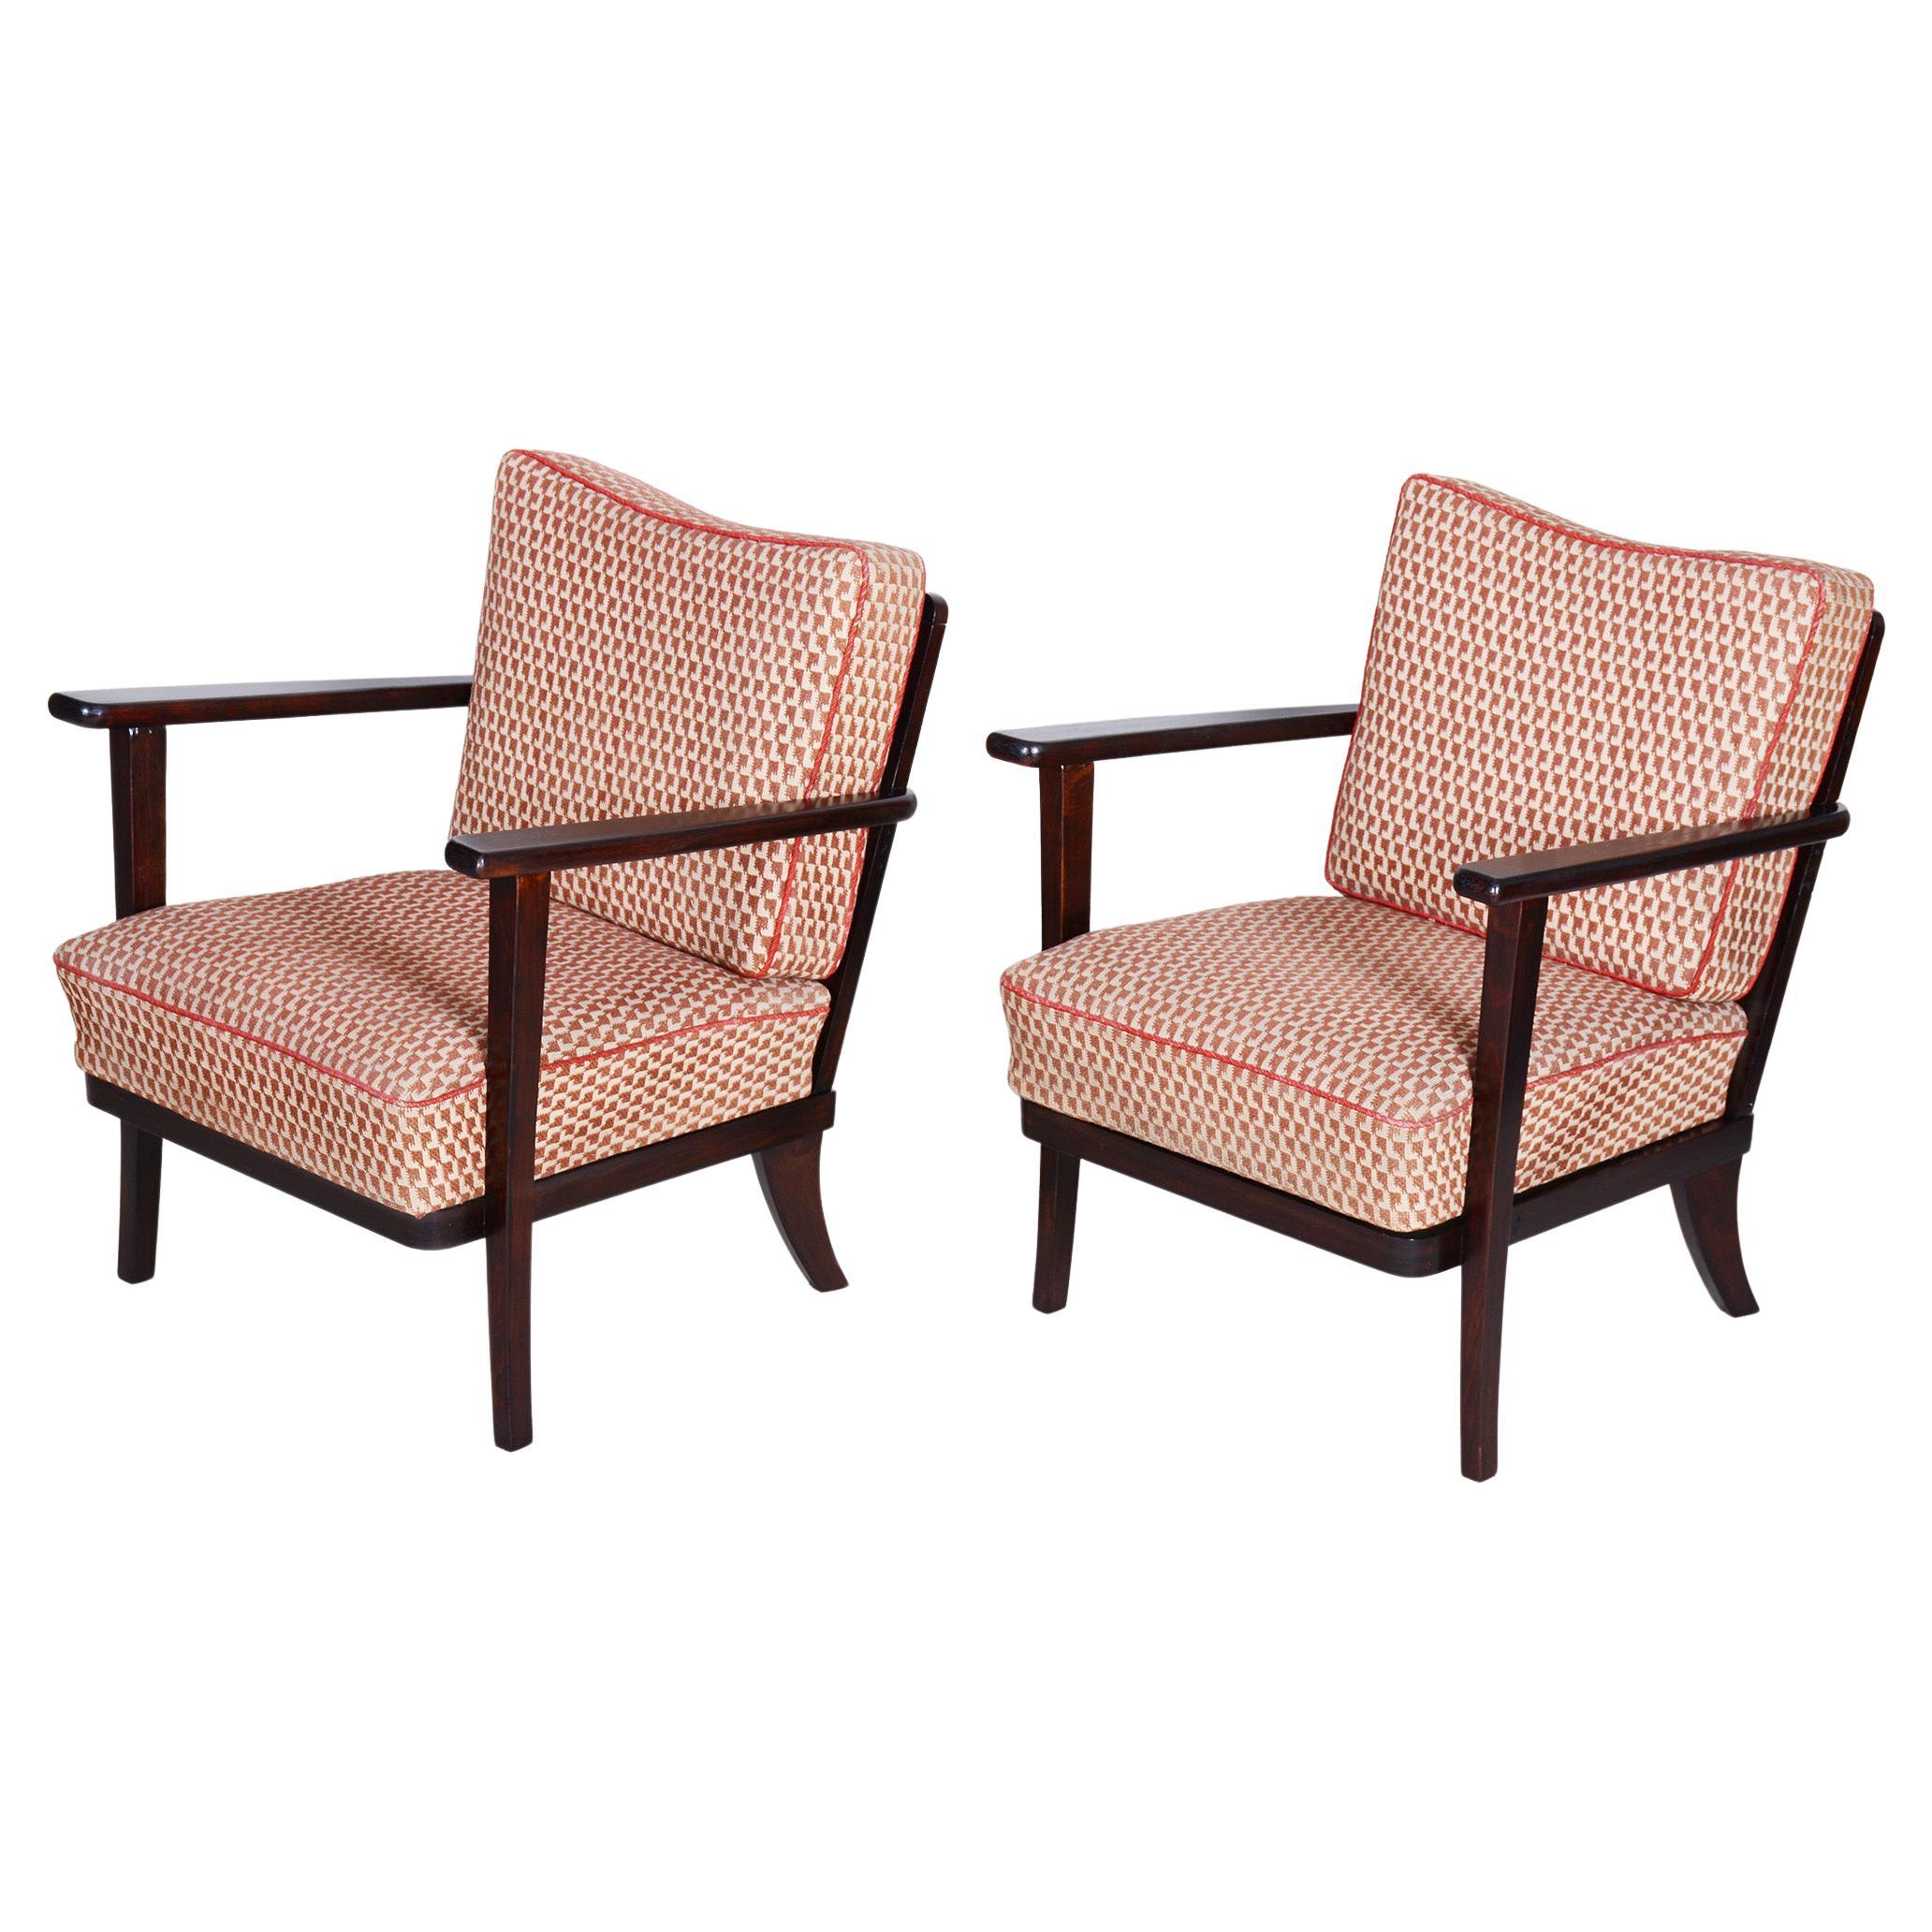 Pair of Art Deco Armchairs Made in the 1930s, Non Restored, Original Beech